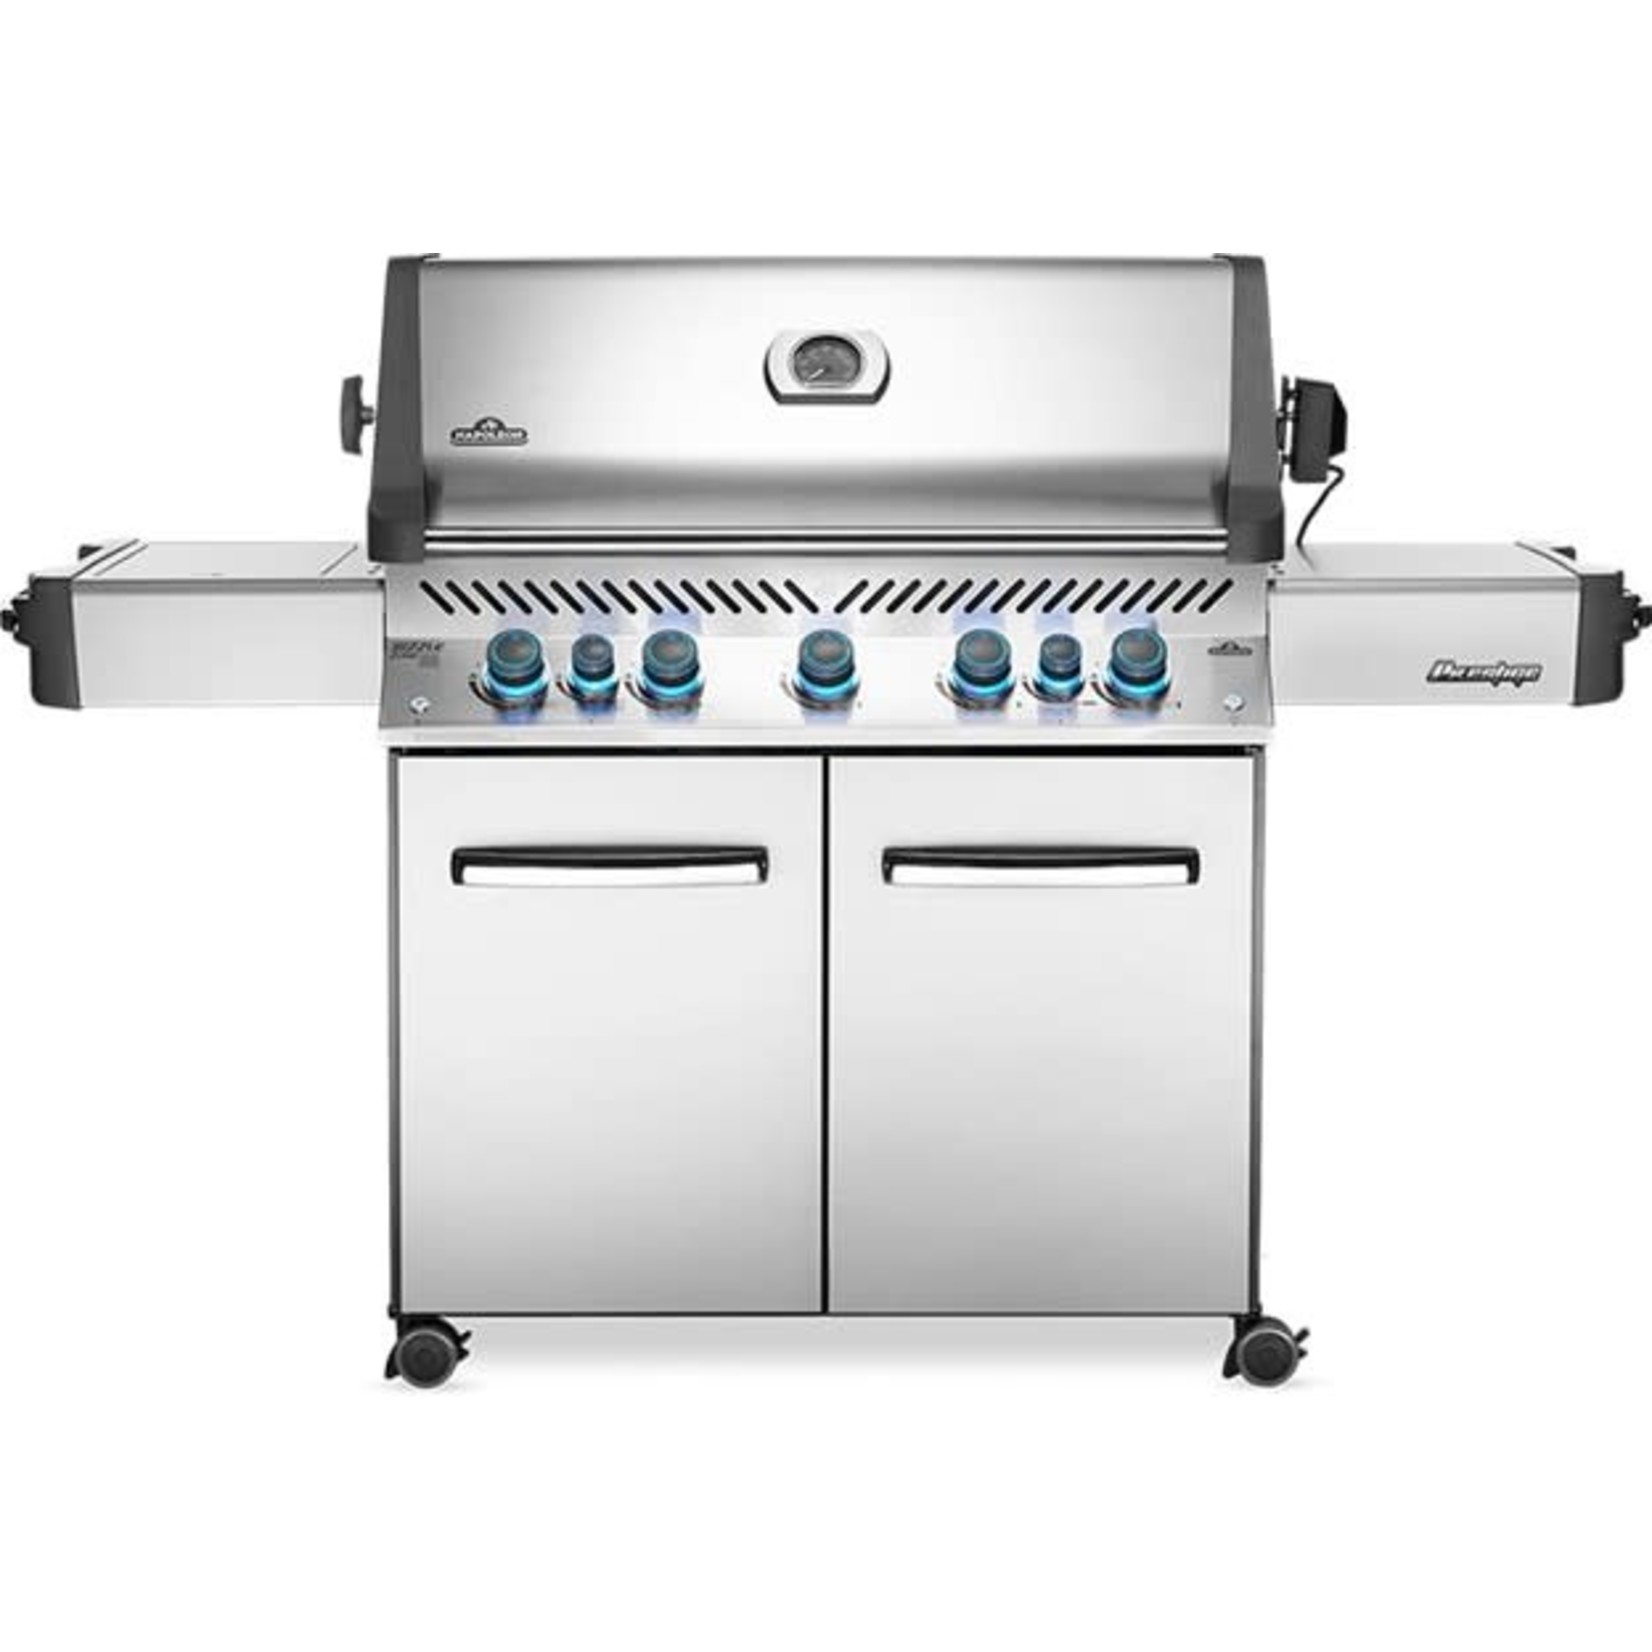 Napoleon Prestige® 665 Propane Gas Grill with Infrared Side and Rear Burners, Stainless Steel ($125 Instant Rebate)